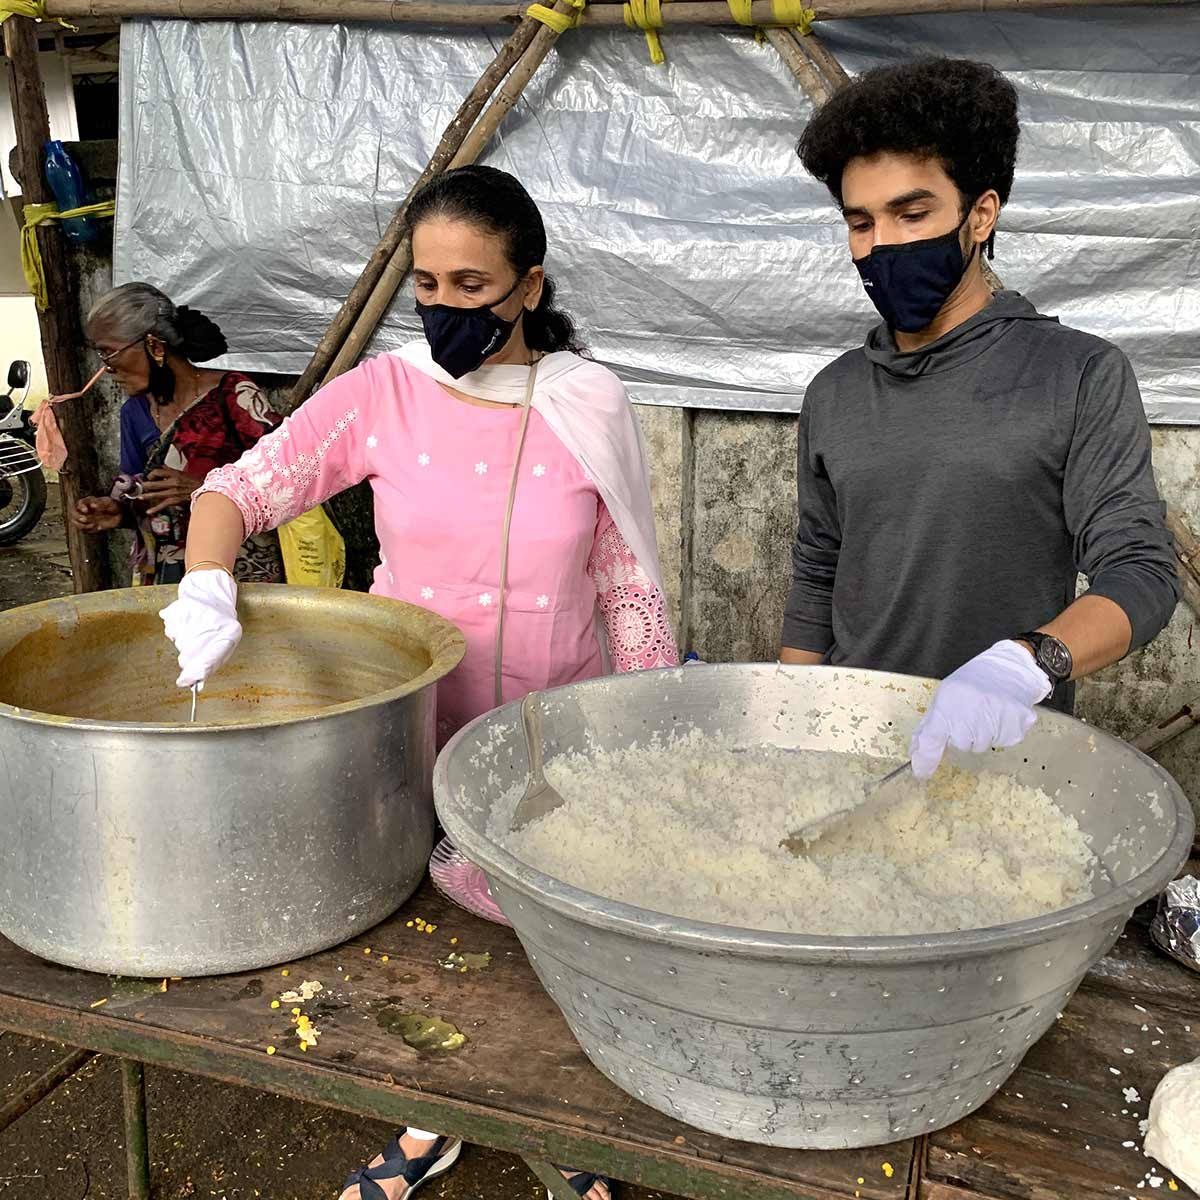 Heena and Harsh Mandavia from Mumbai have been serving food for the needy and underprivileged during the lockdown